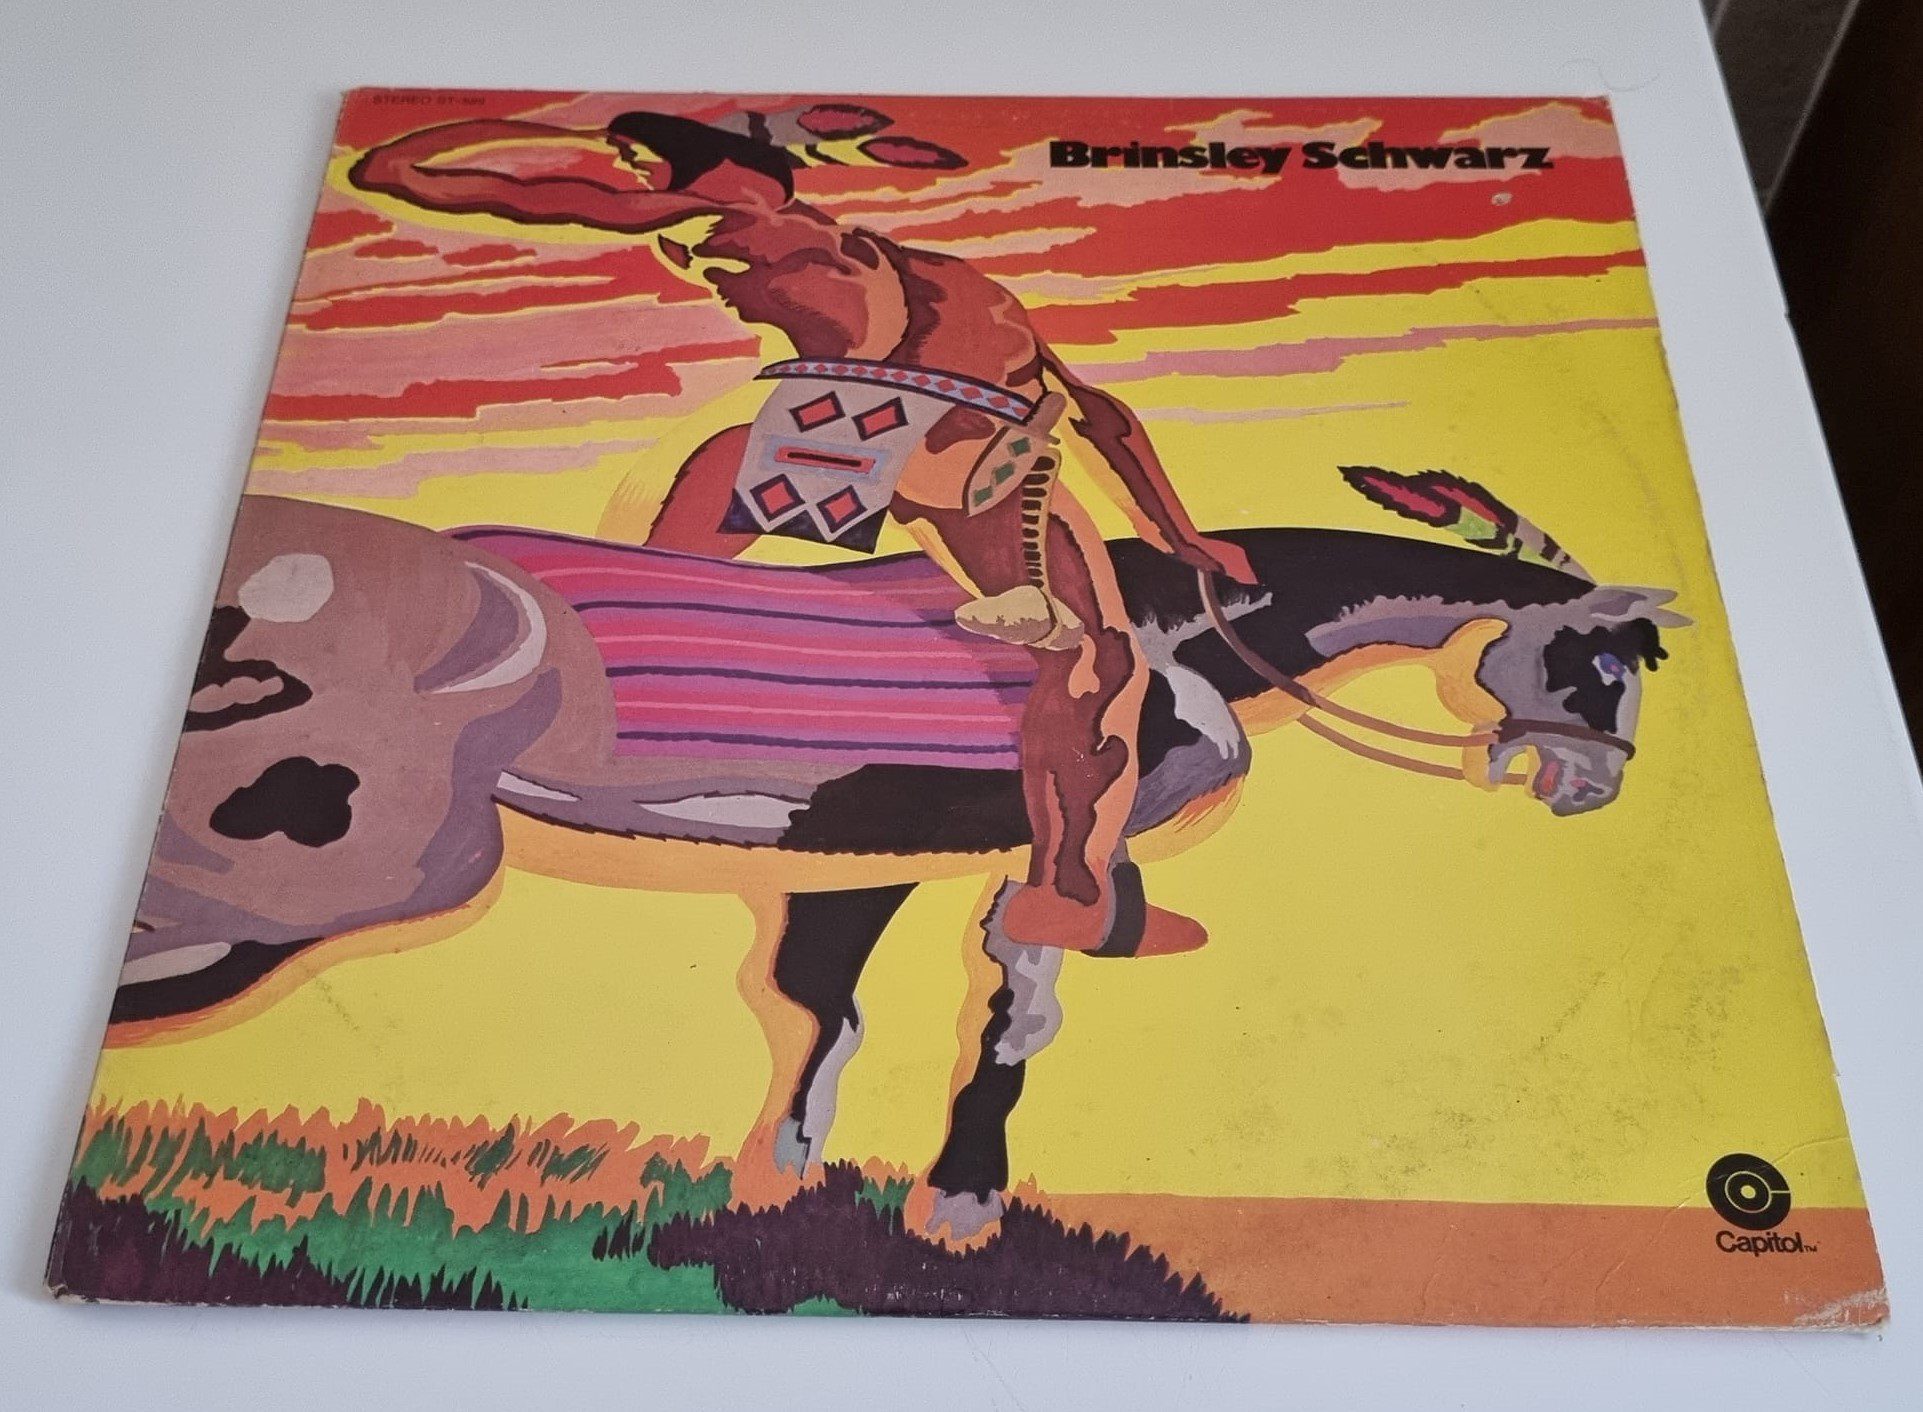 Buy this rare Brinsley Schwarz record by clicking here